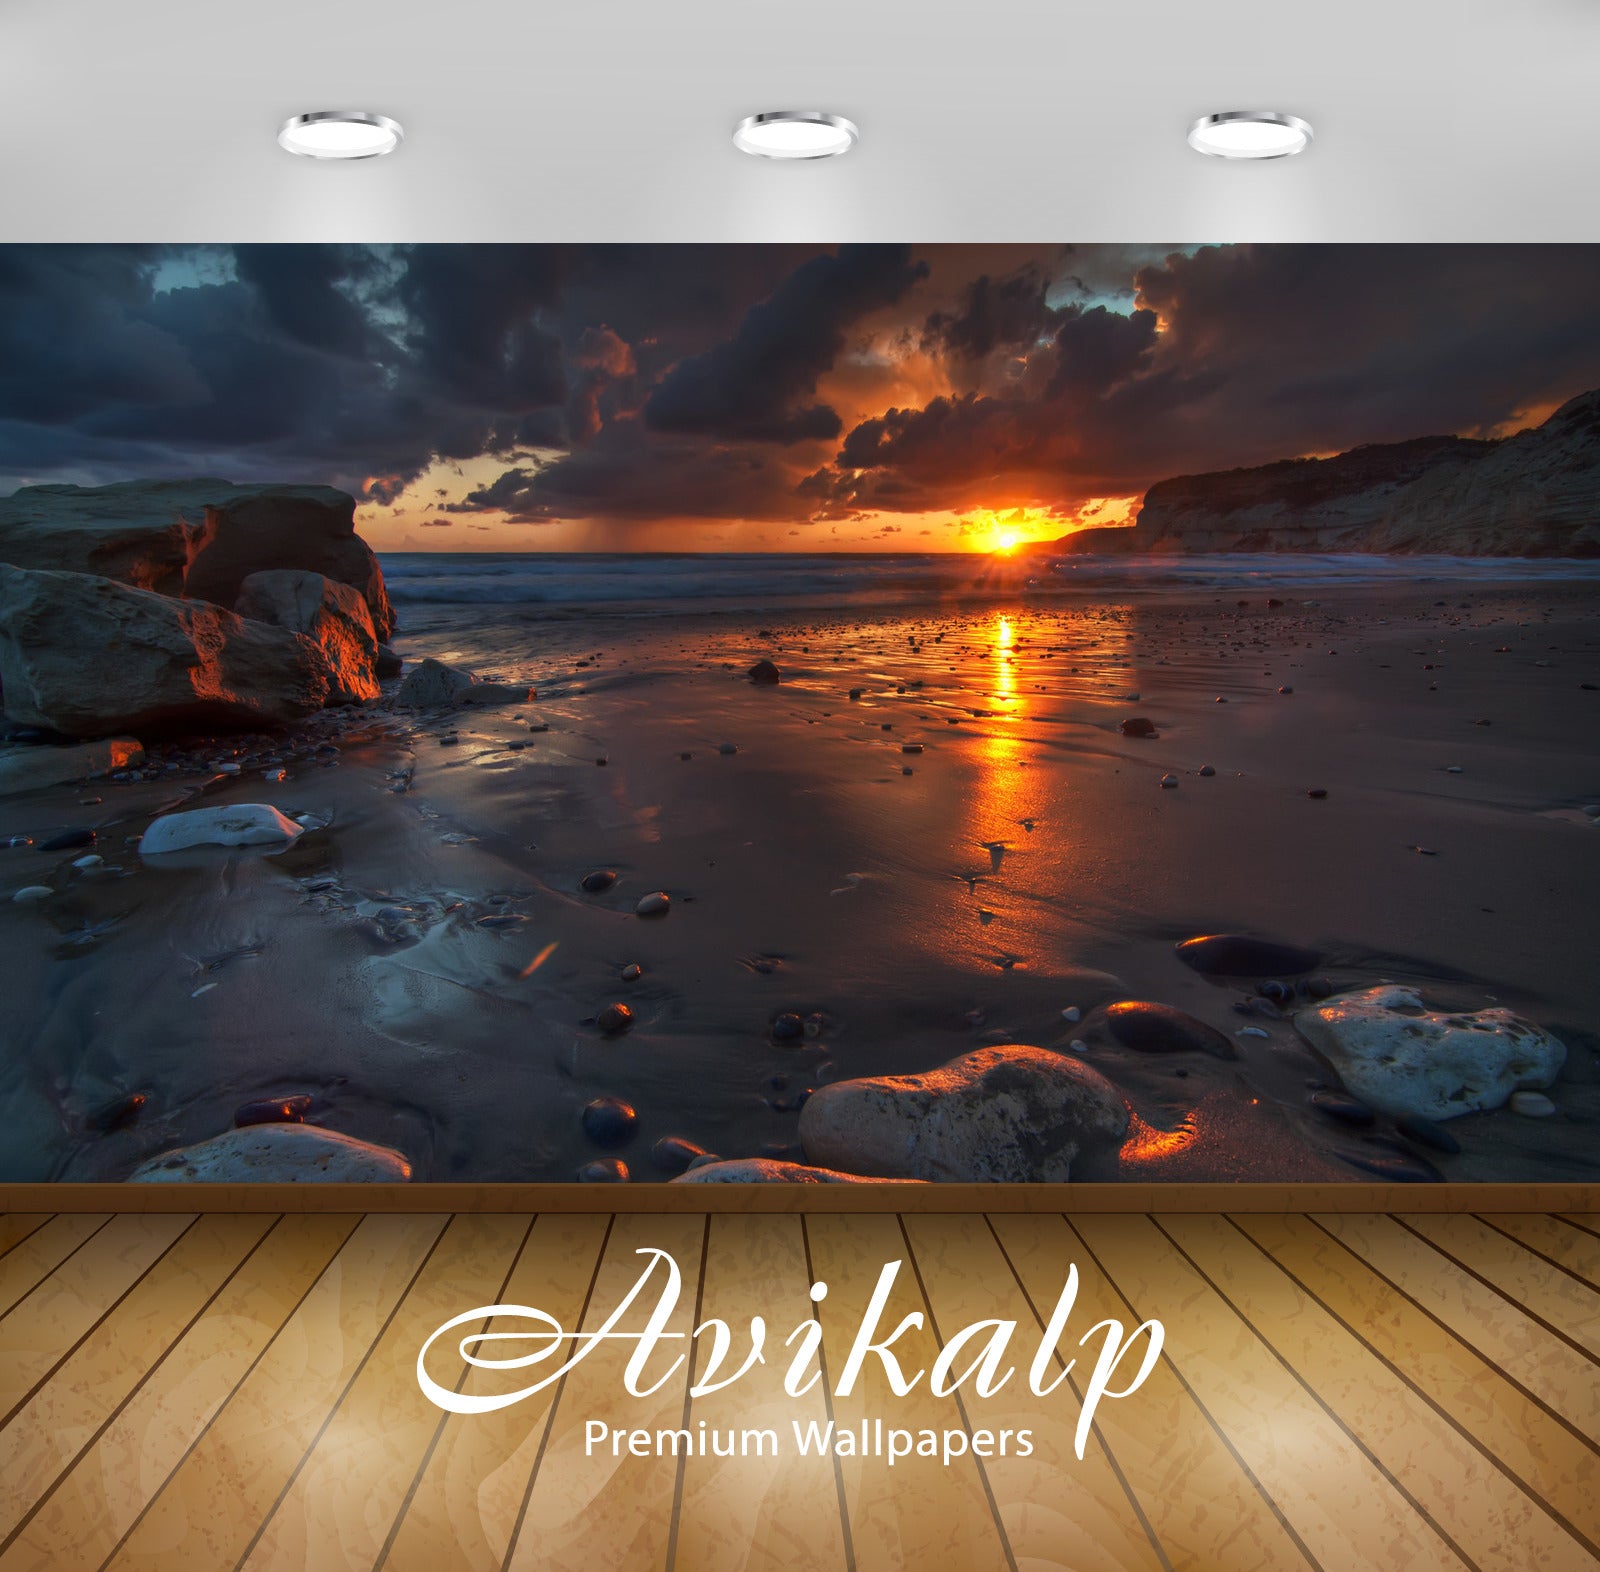 Avikalp Exclusive Awi1530 Beautiful Sunrise Sea Shore Full HD Wallpapers for Living room, Hall, Kids